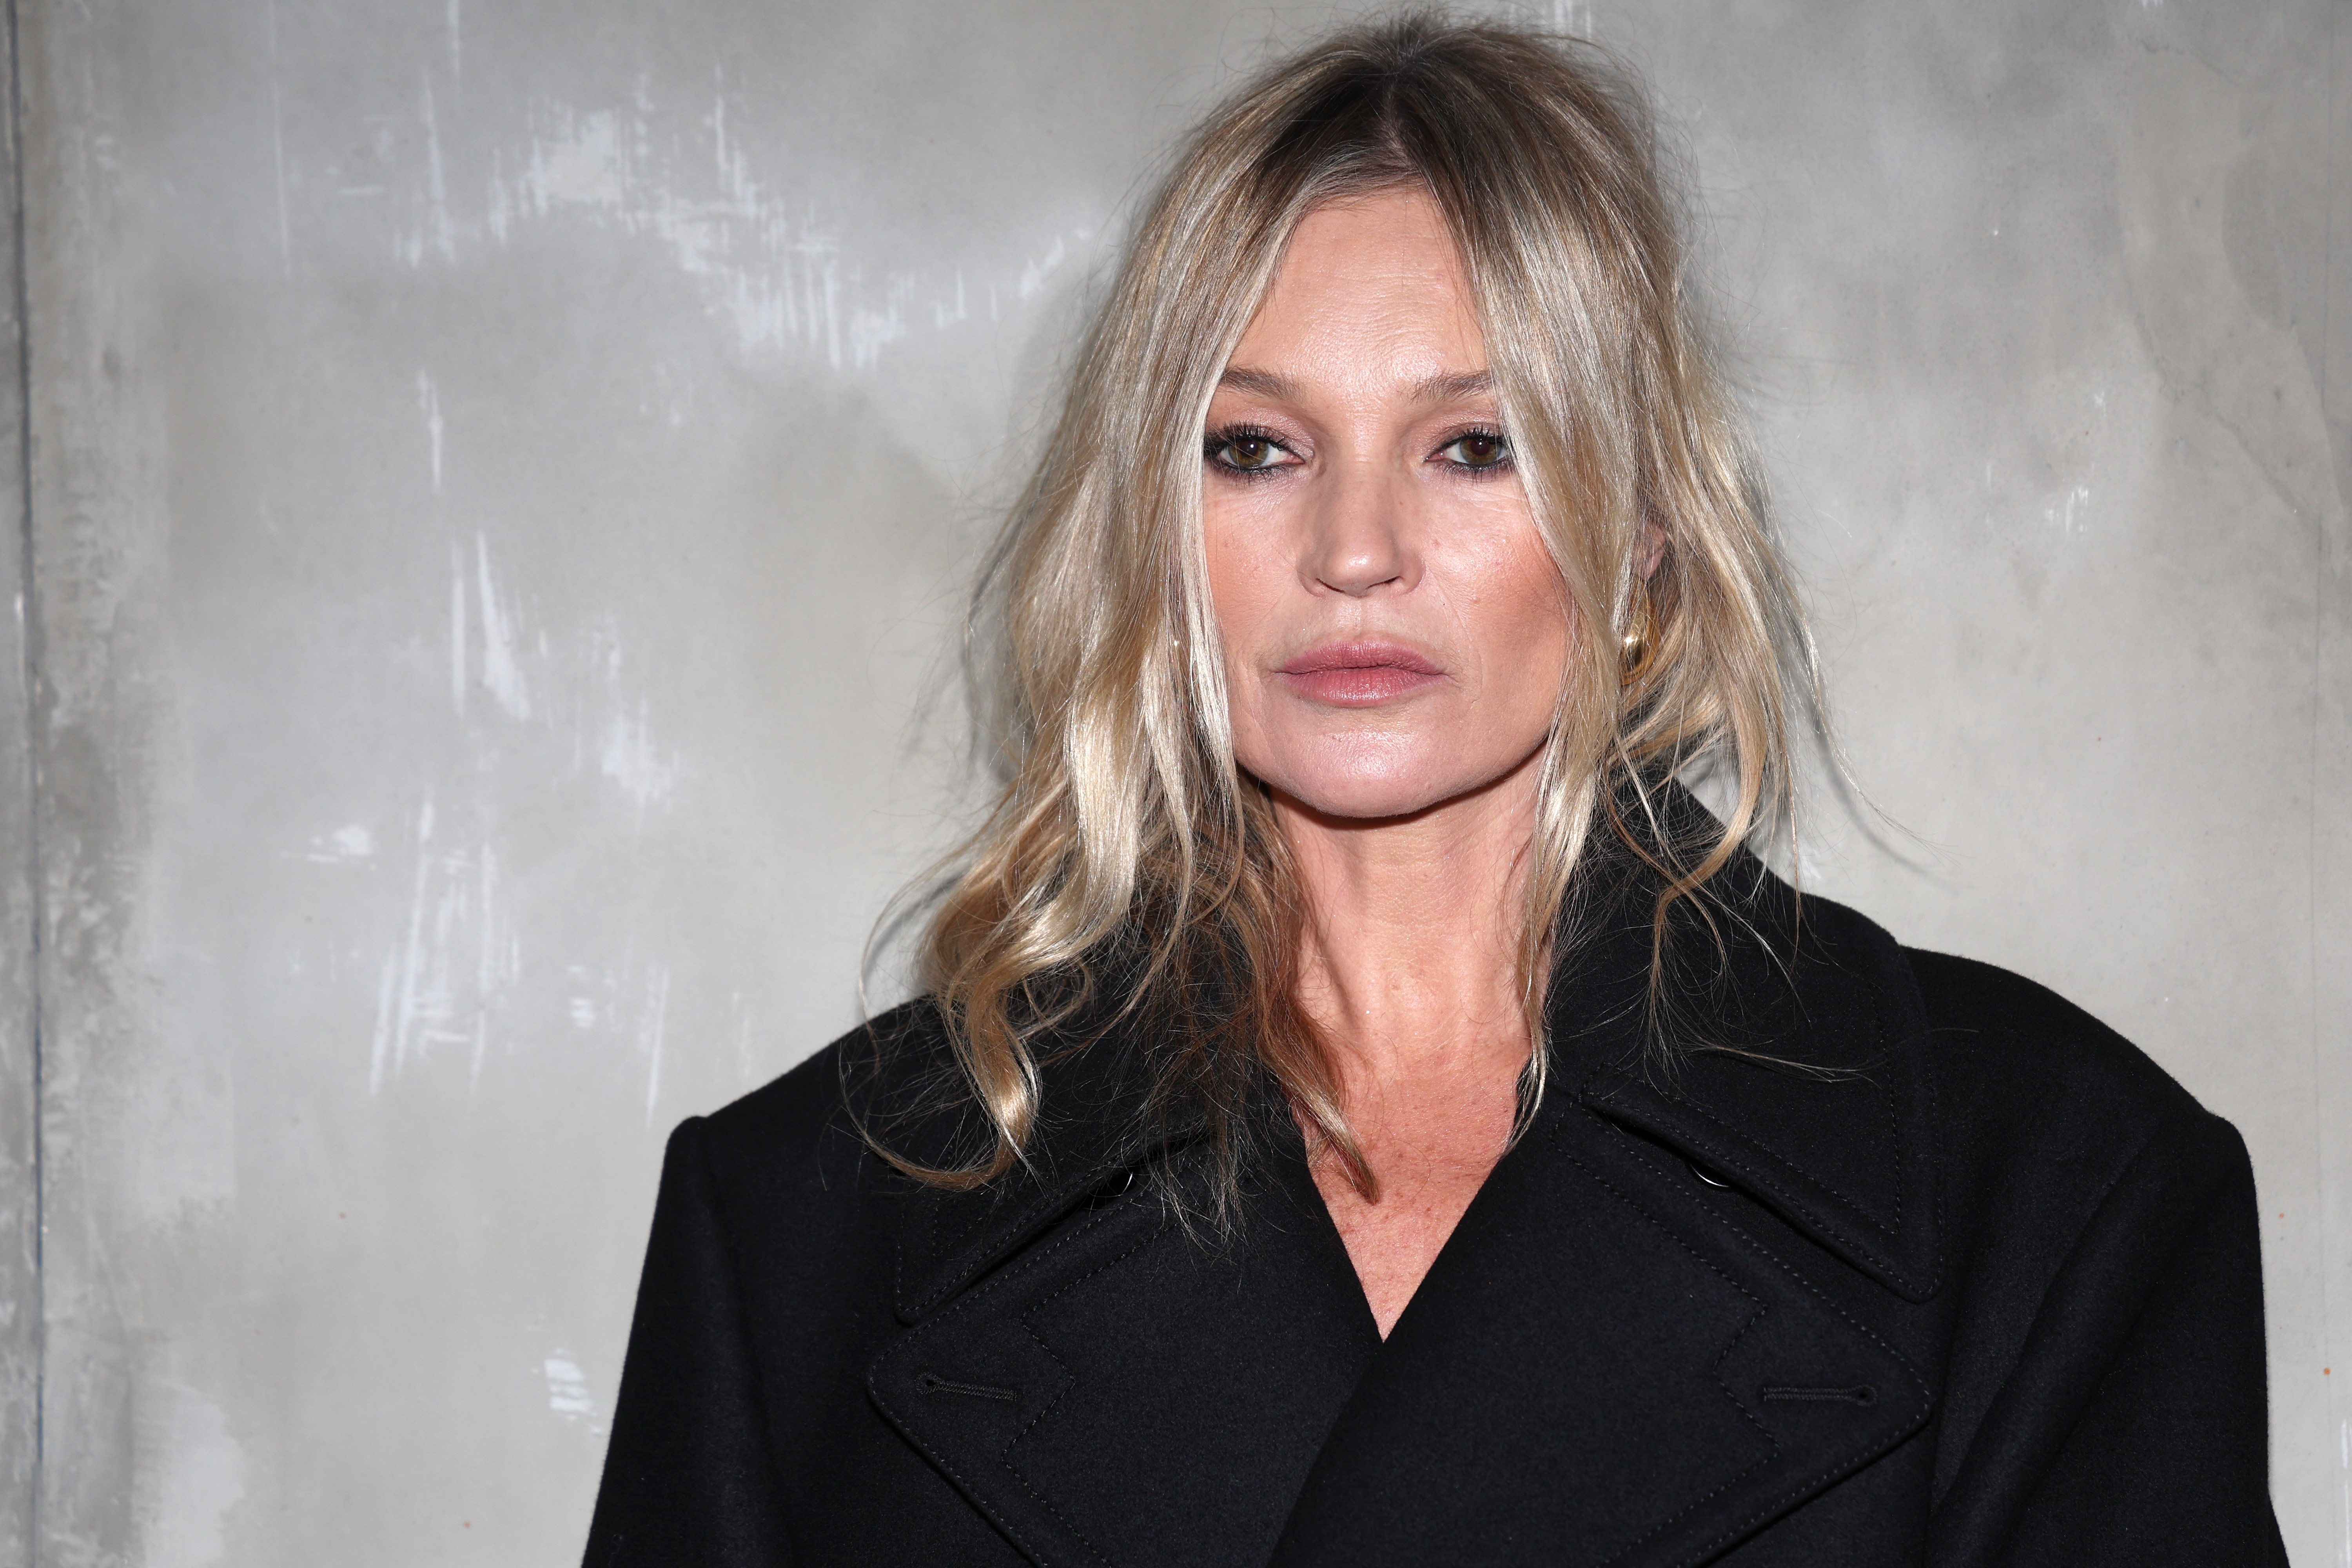 Kate Moss, in black, poses against a grey background in Milan, Italy